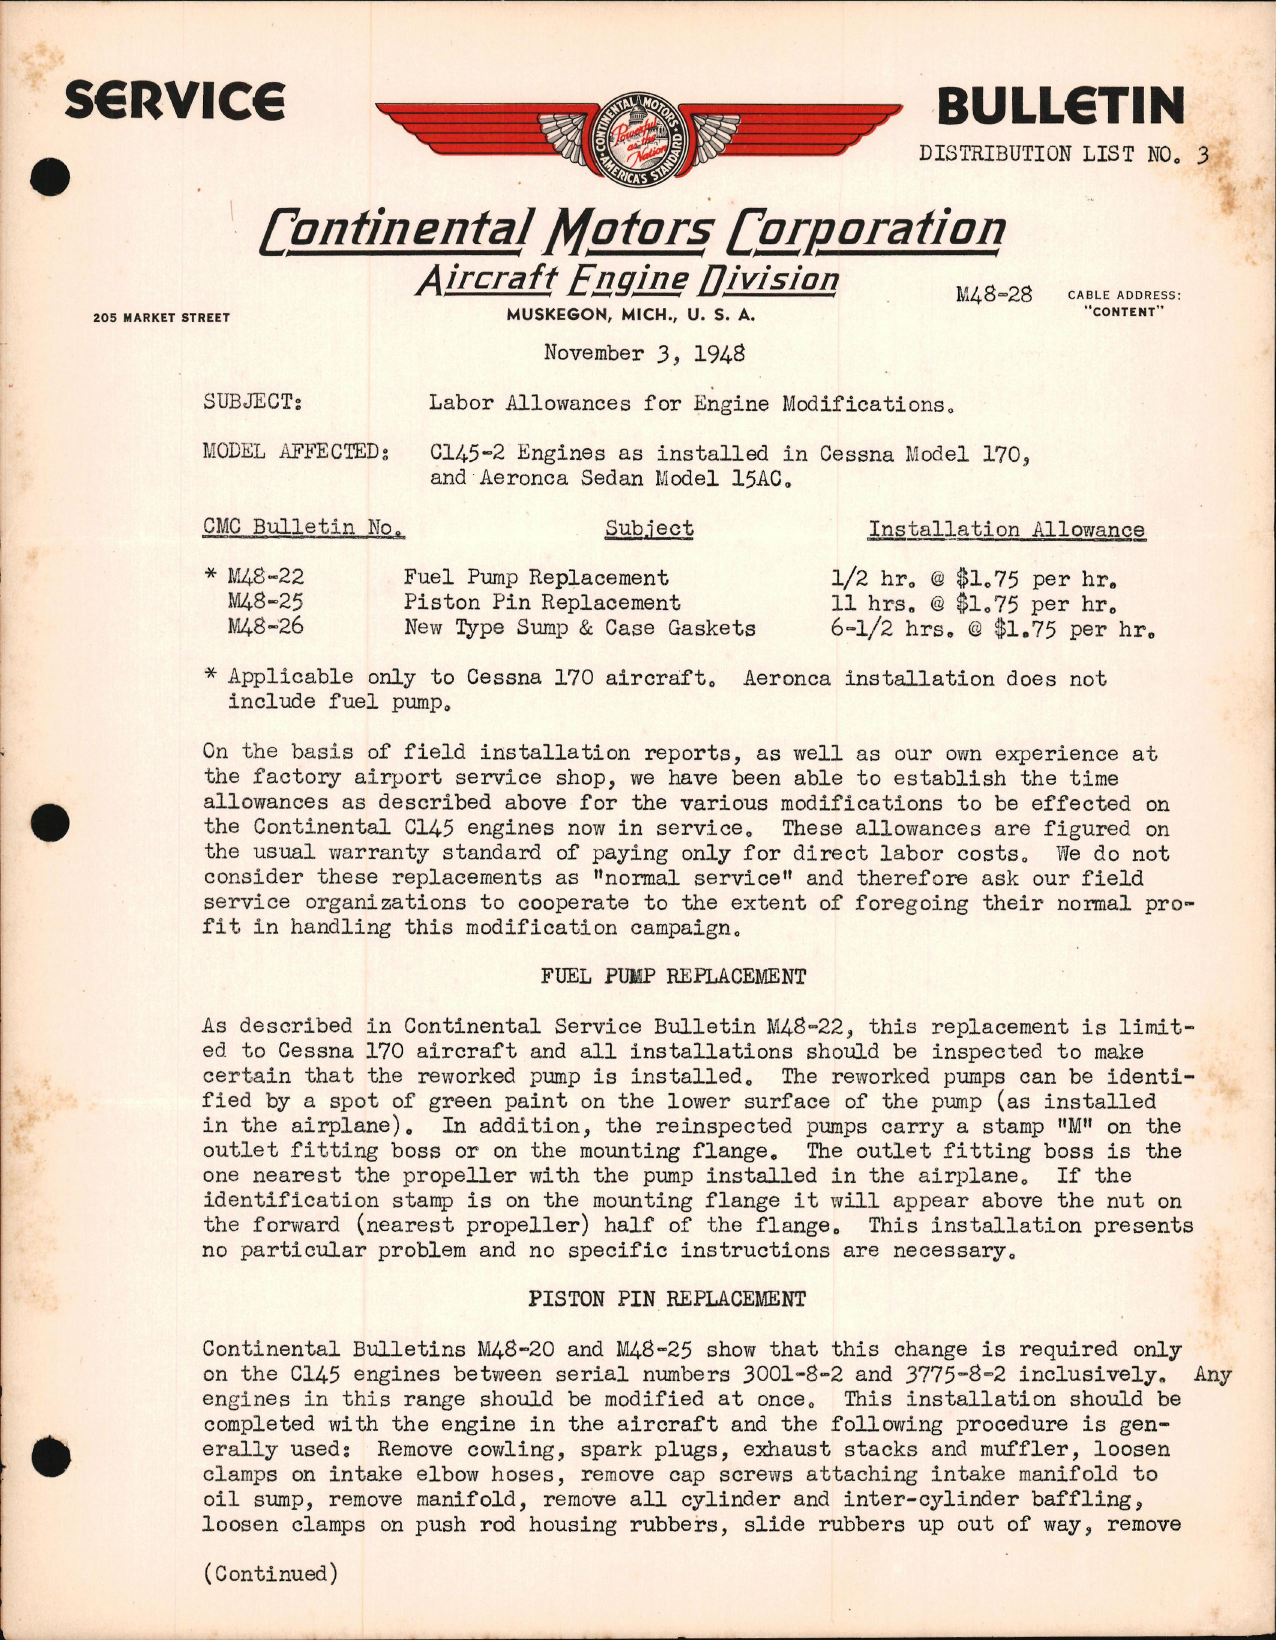 Sample page 1 from AirCorps Library document: Labor Allowances for Engine Modifications